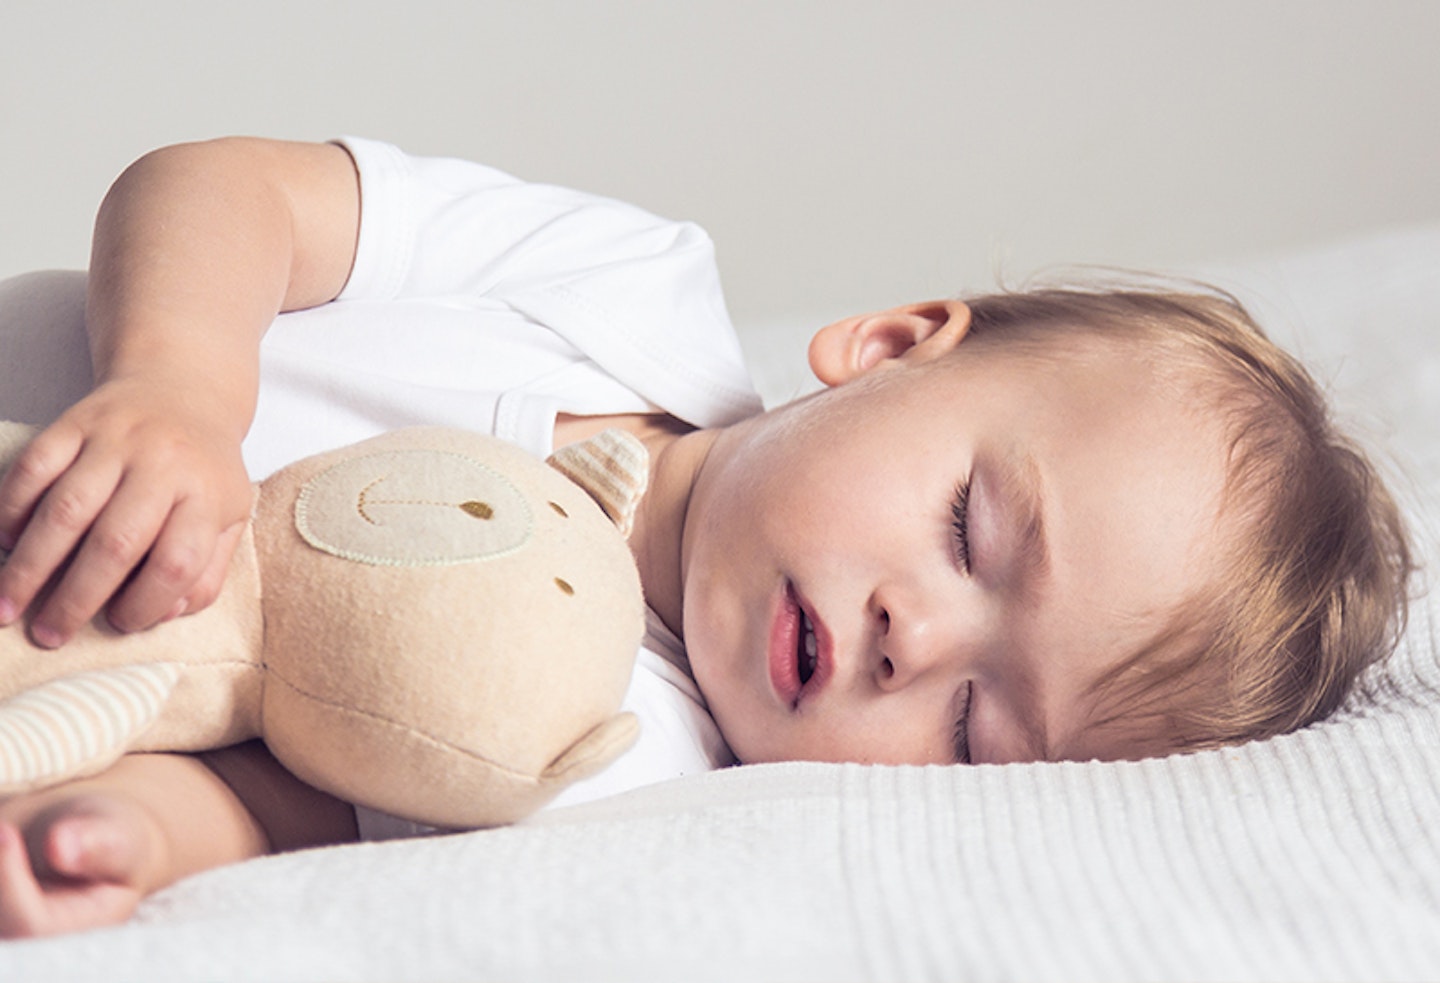 10 tips to help your little ones get to sleep that \*really\* work